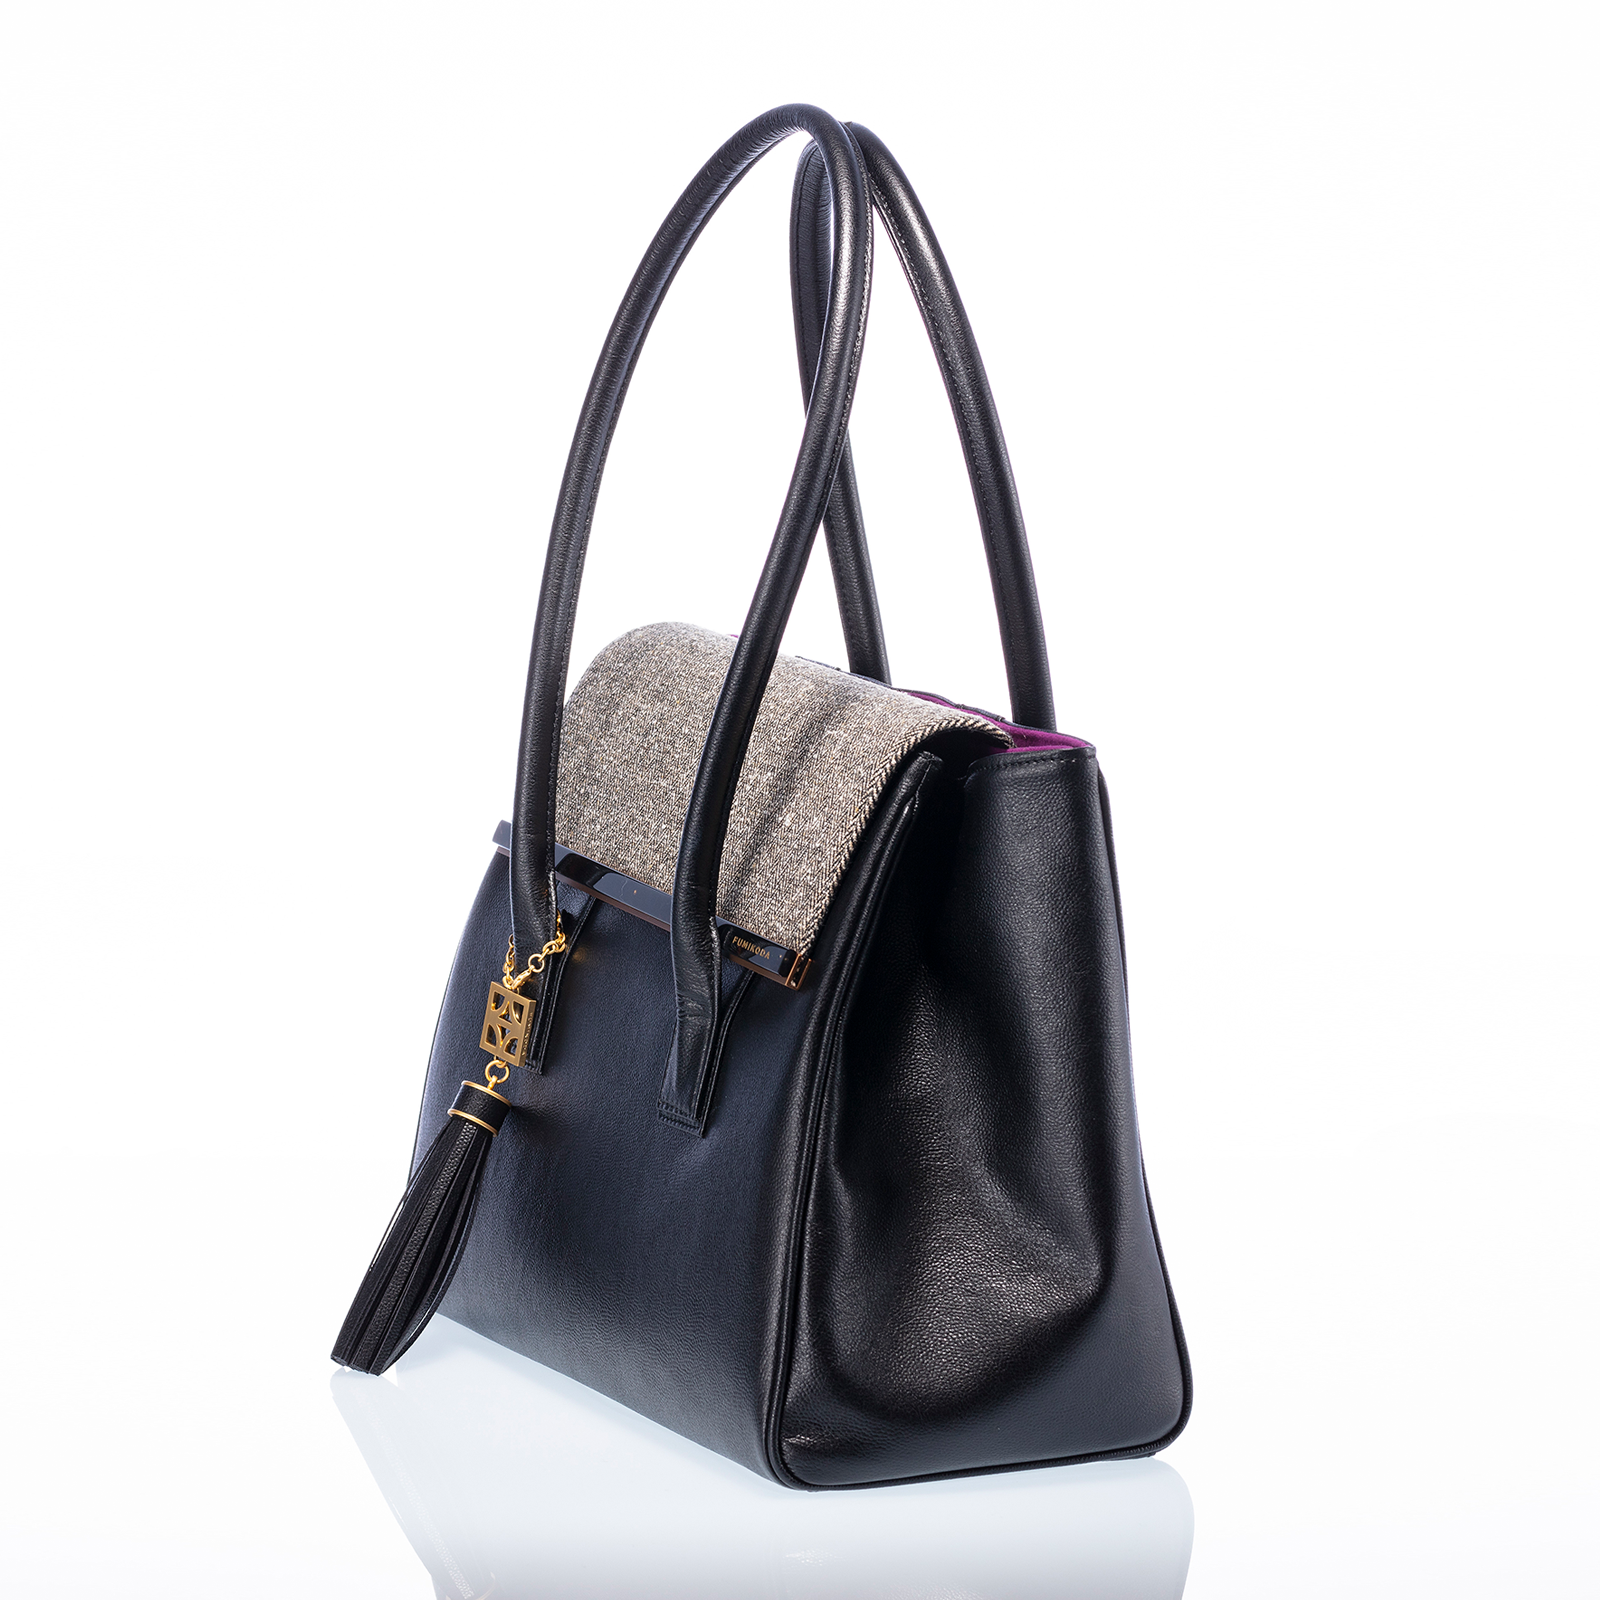 ARIANNA: Shoulder bag with flap